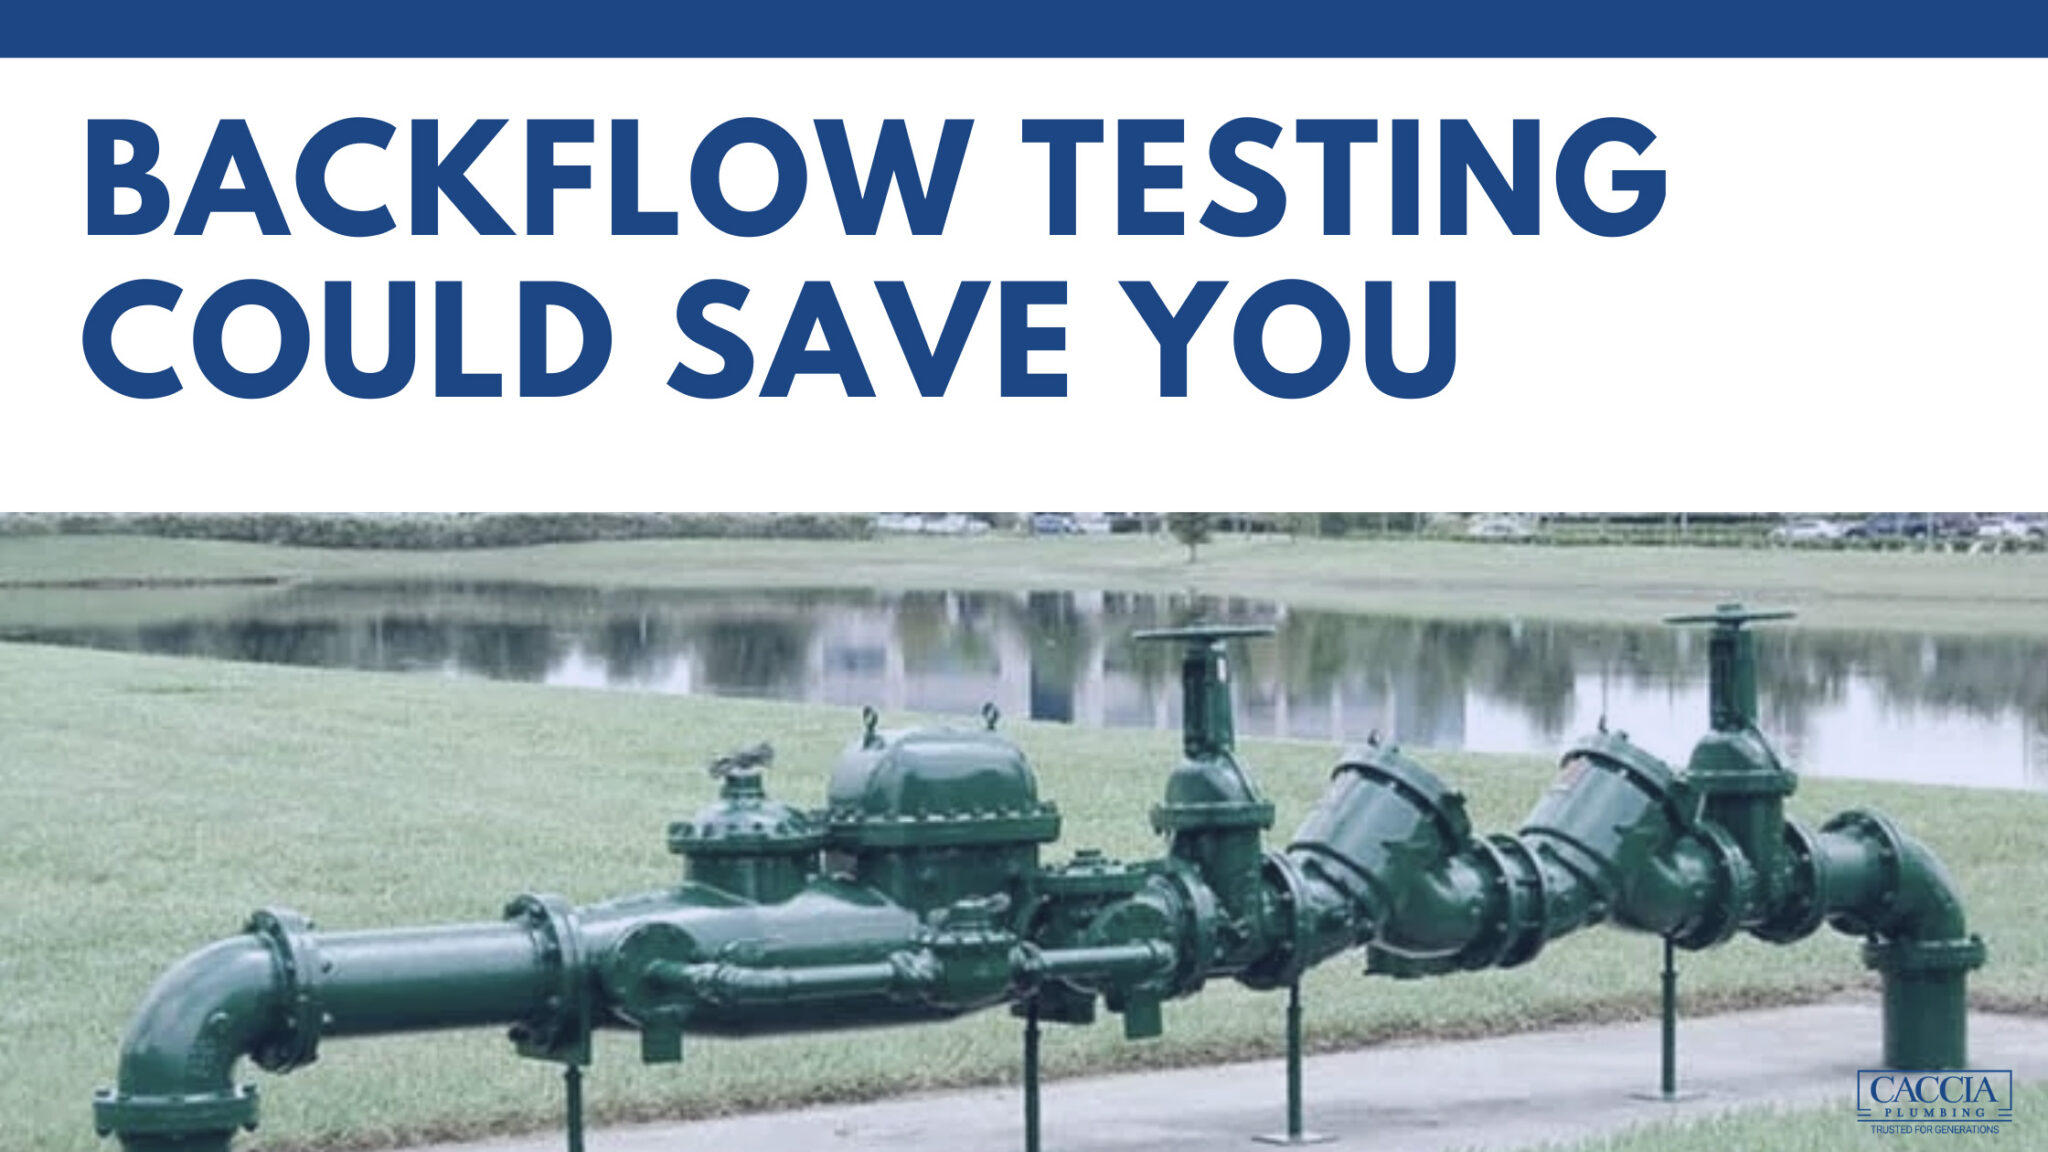 Backflow Testing Could Save You